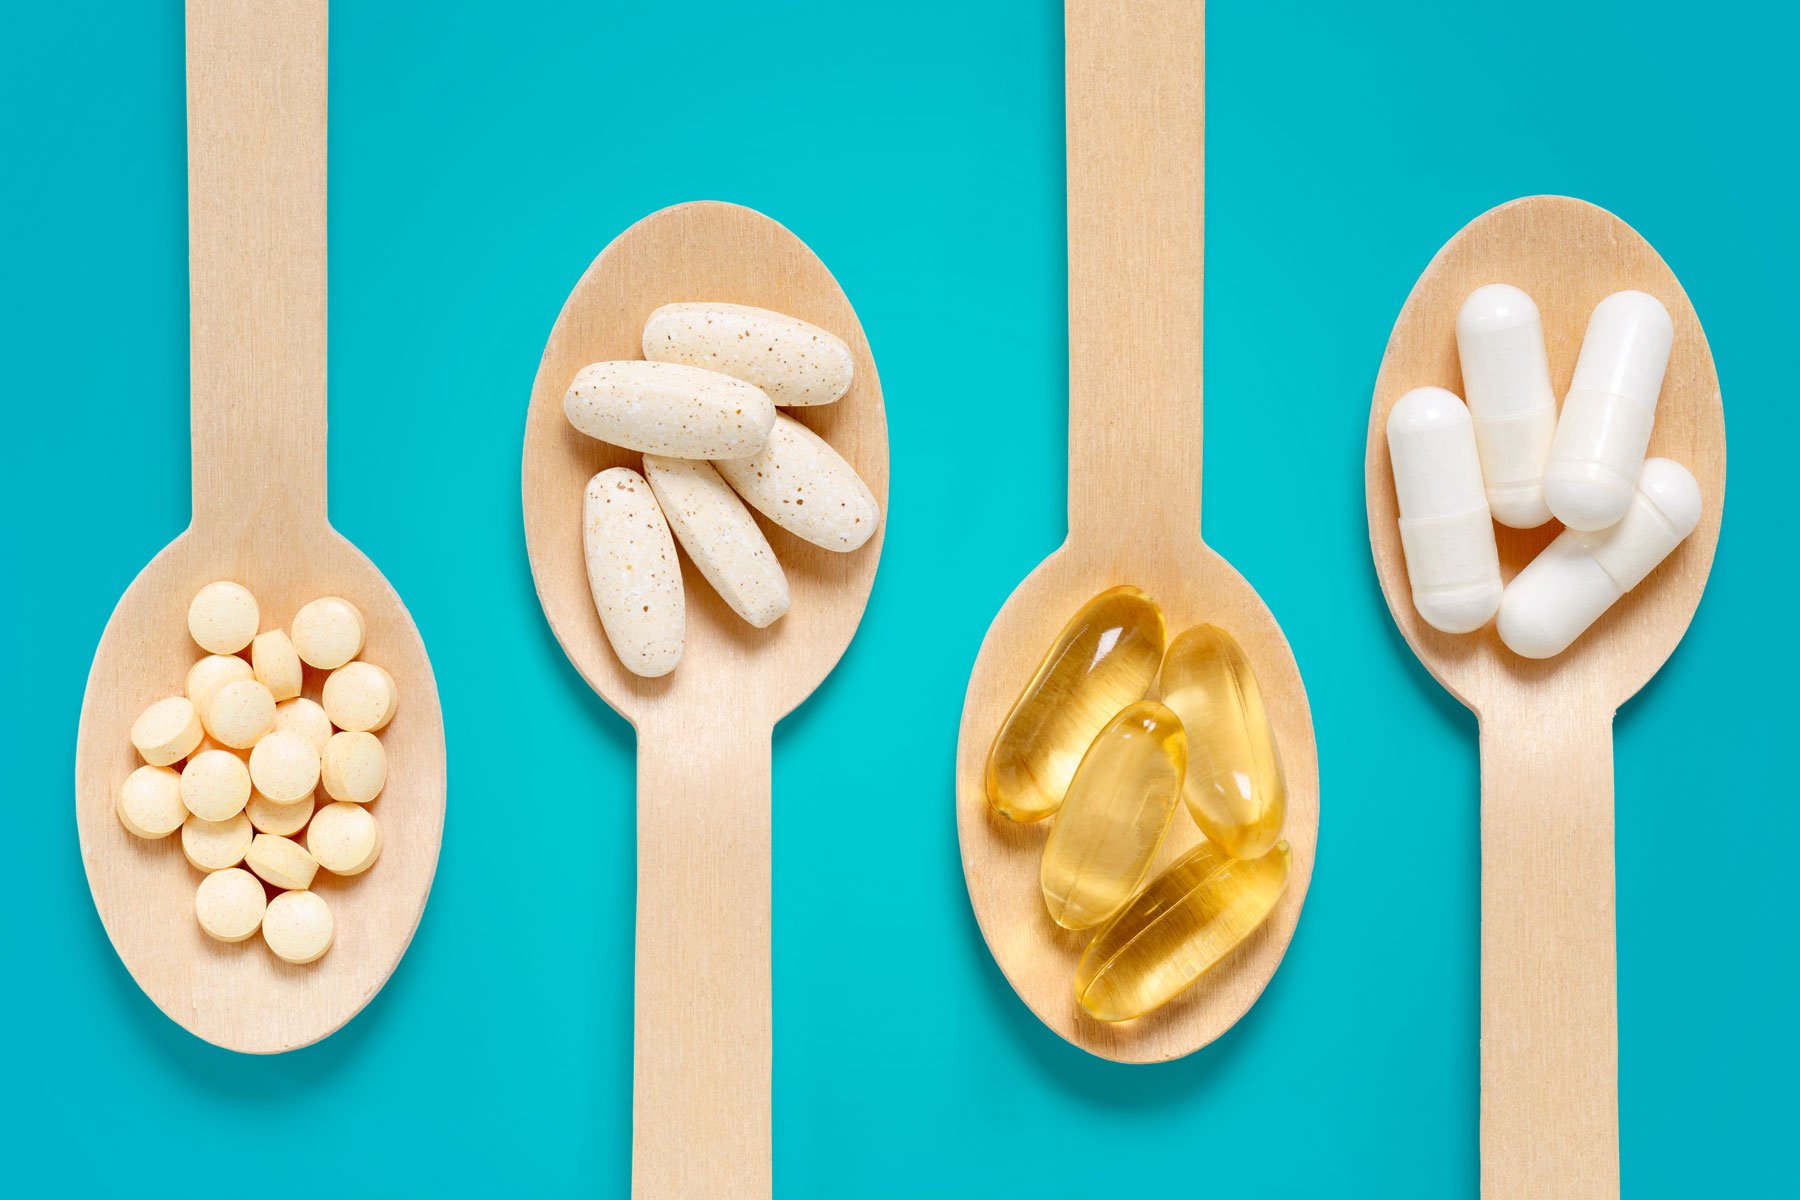 The 10 best vitamins and supplements to consider for optimal metabolic health